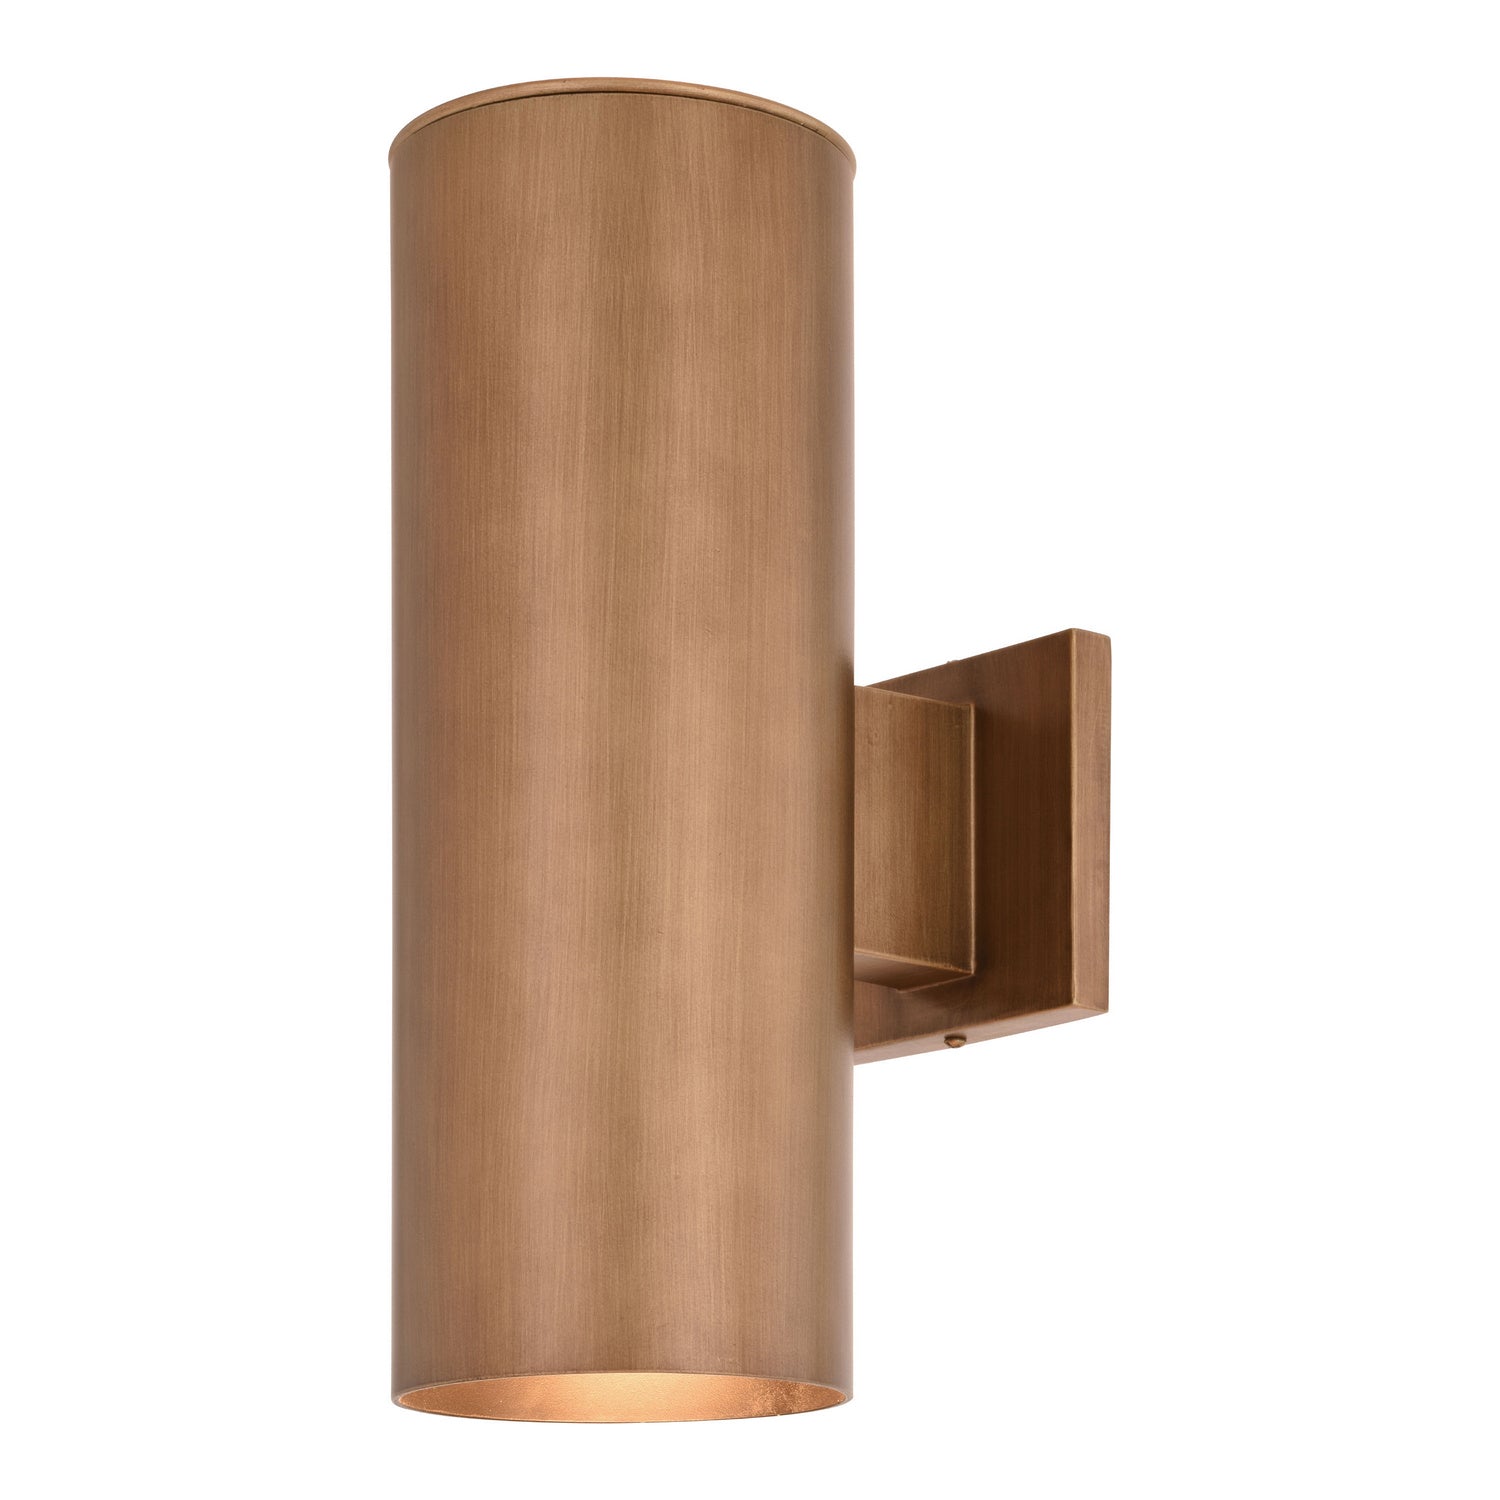 Vaxcel Lighting T0588 Chiasso Two Light Outdoor Wall Mount Outdoor Brass